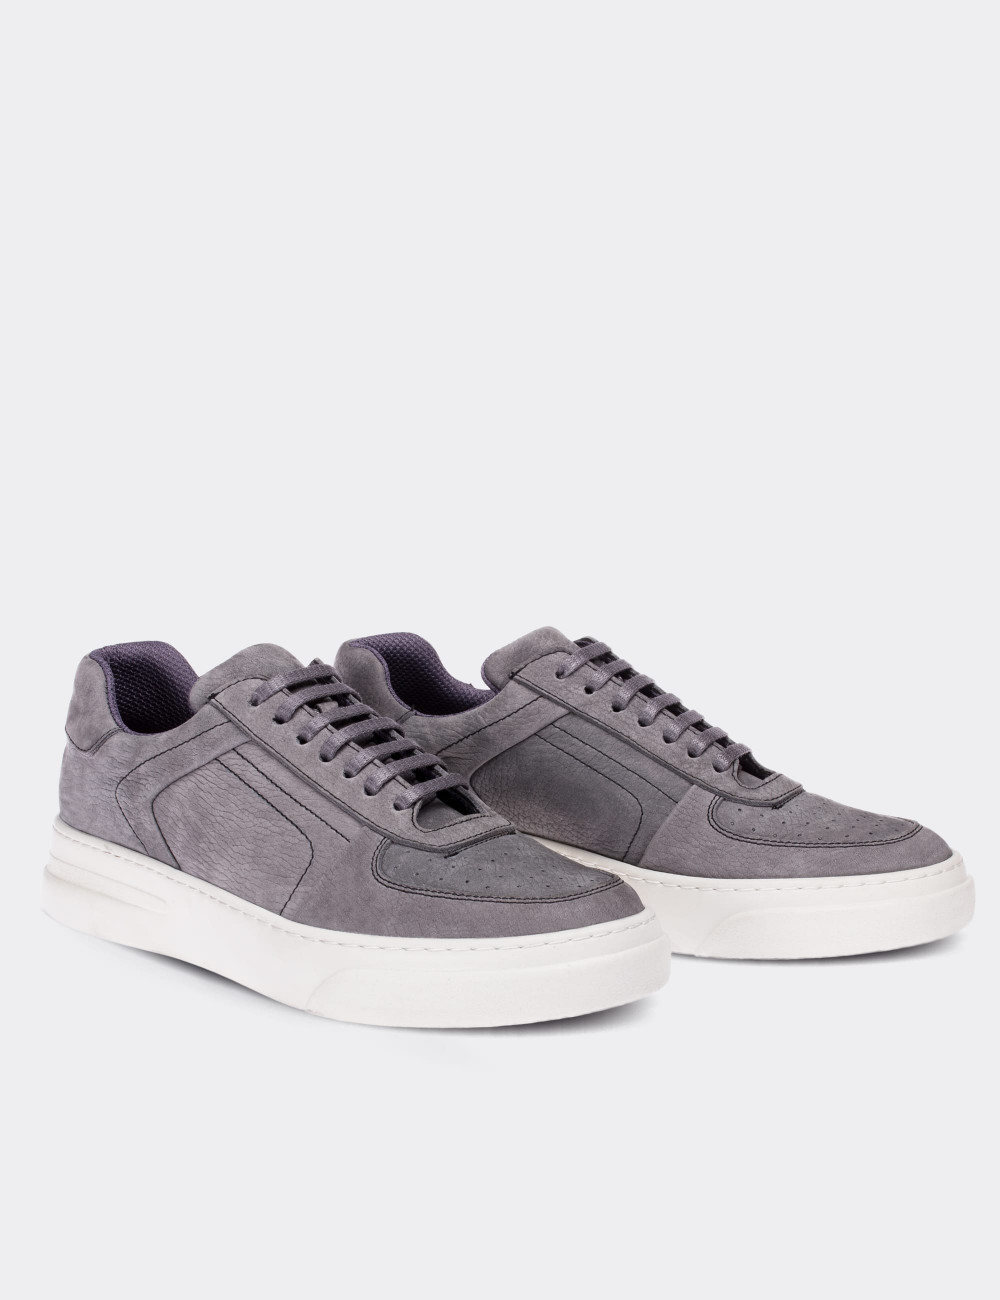 Gray Nubuck Leather Sneakers - 01716MGRIP01